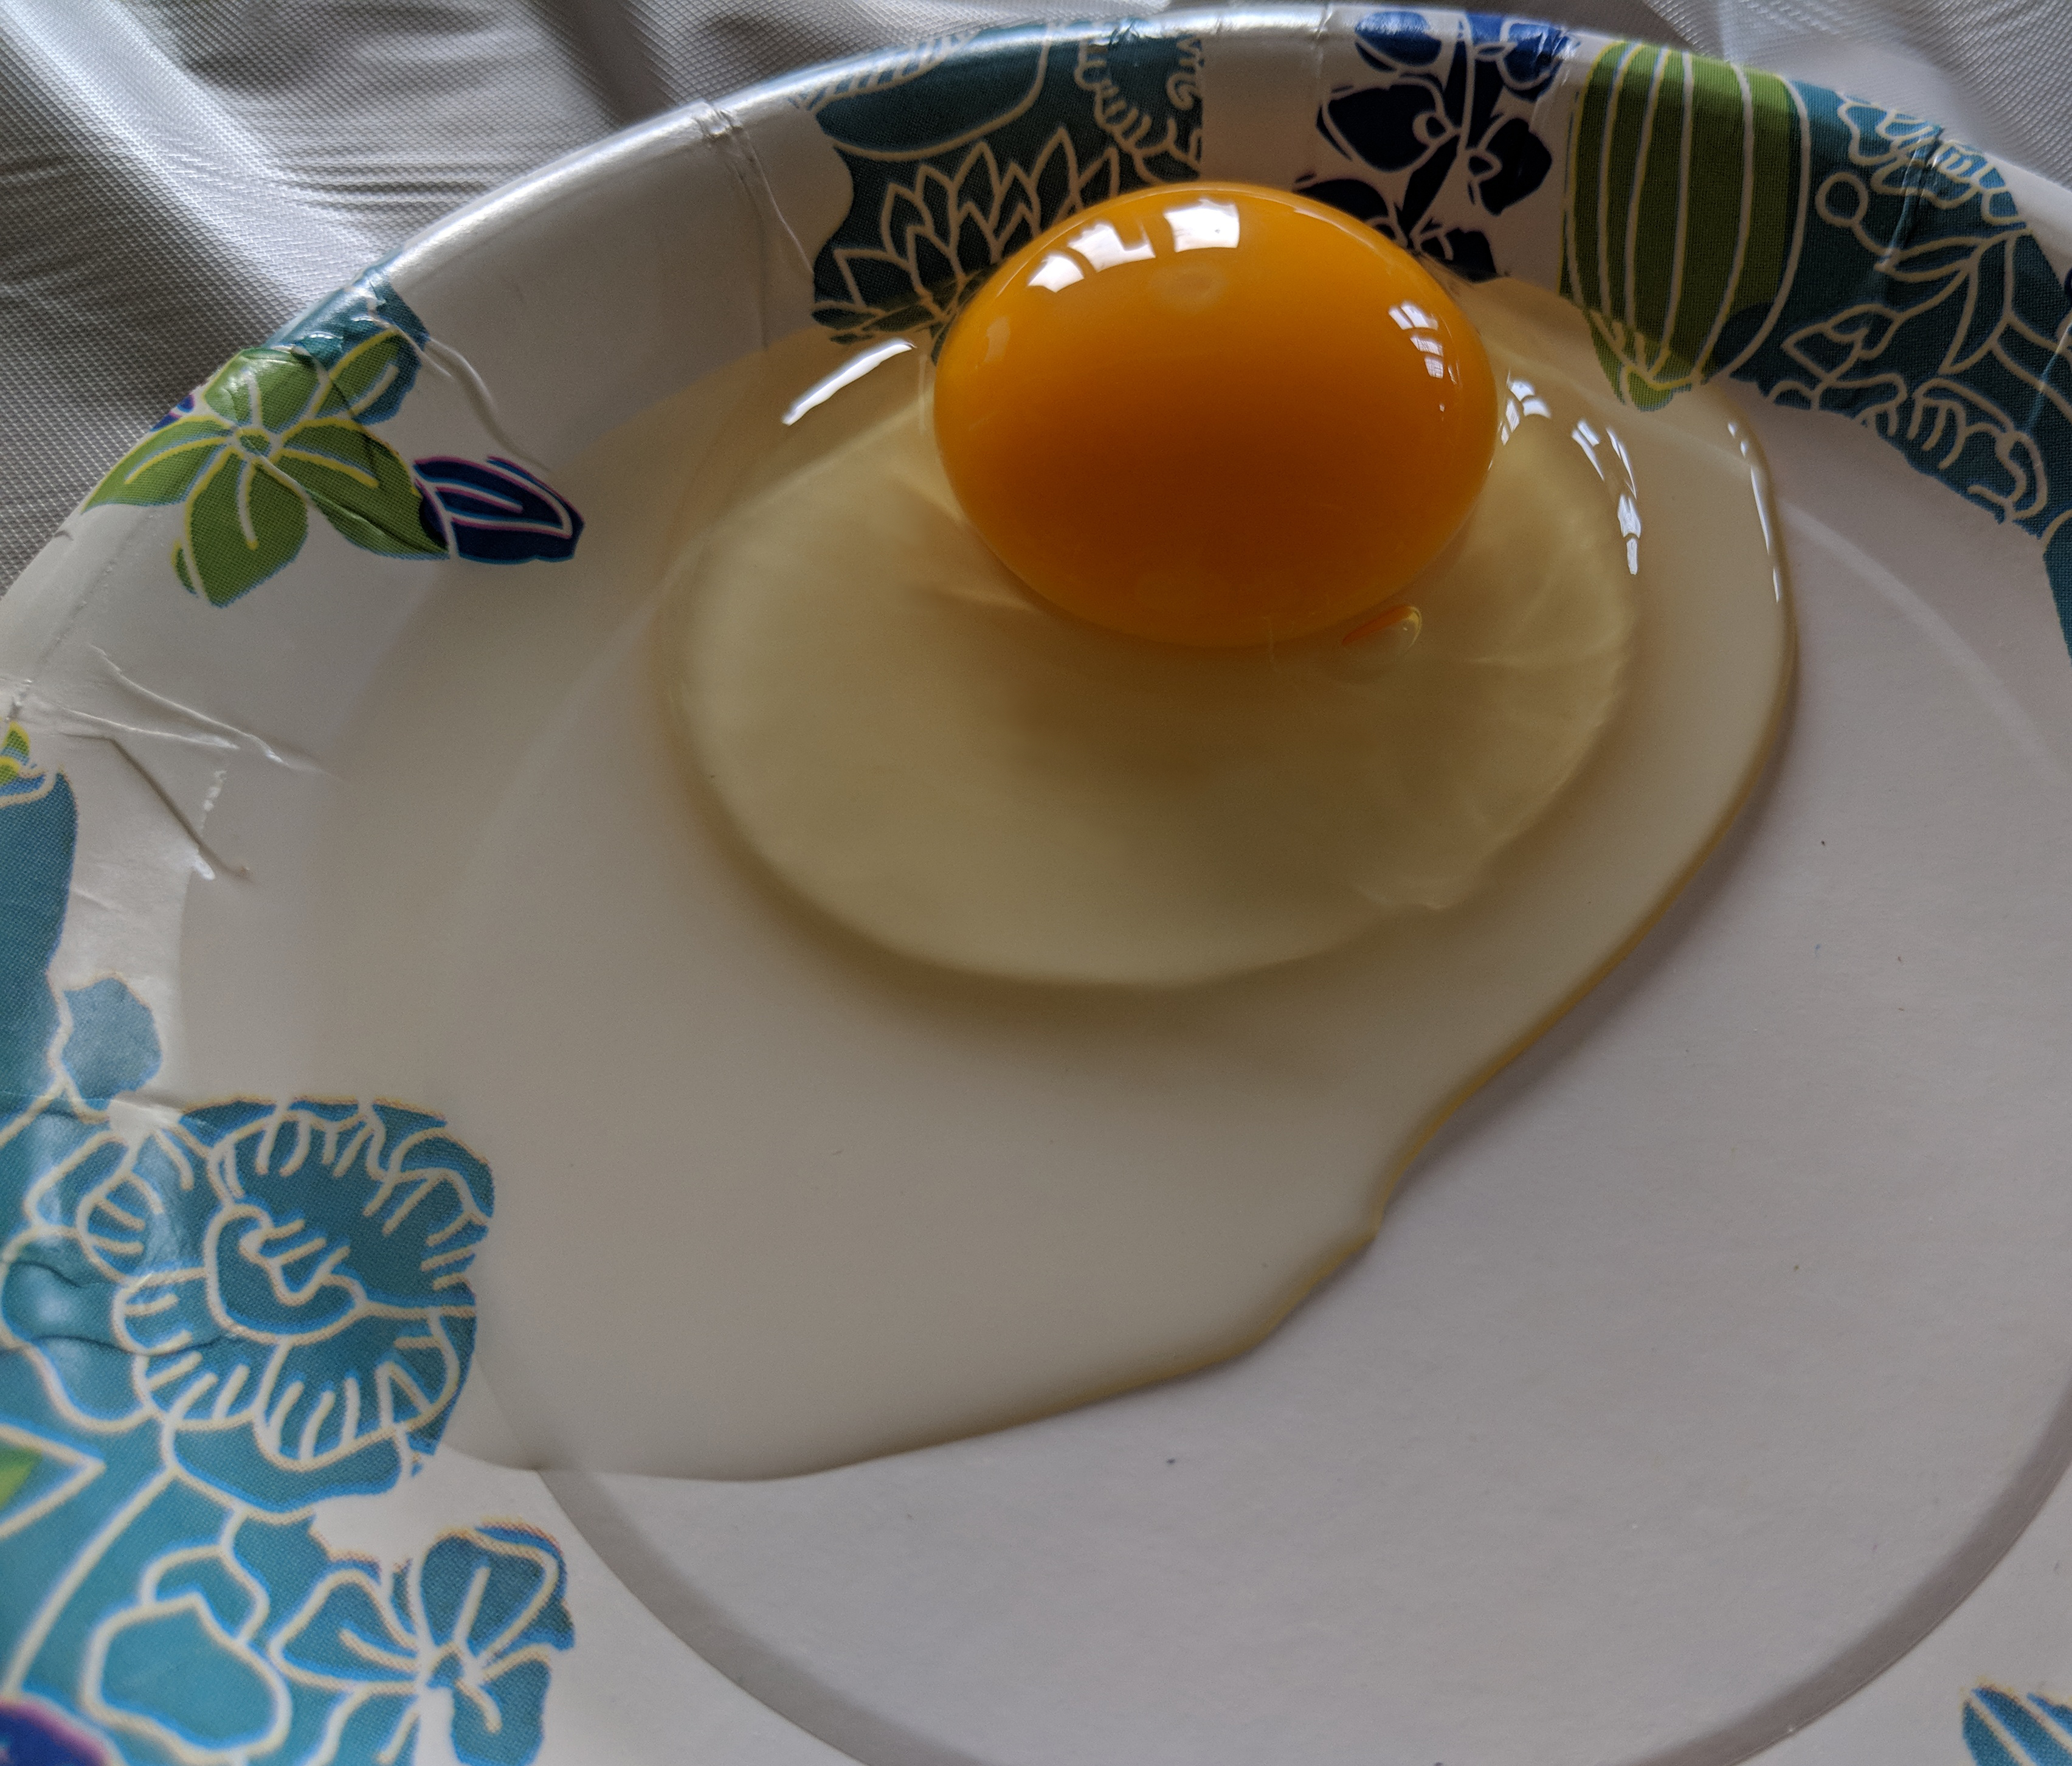 – This egg is Grade AA because the yolk is upright like a golf ball, the thick albumen is close around the yolk and you can see a defined margin between the thick and thin albumen which means this egg is less than two days old.